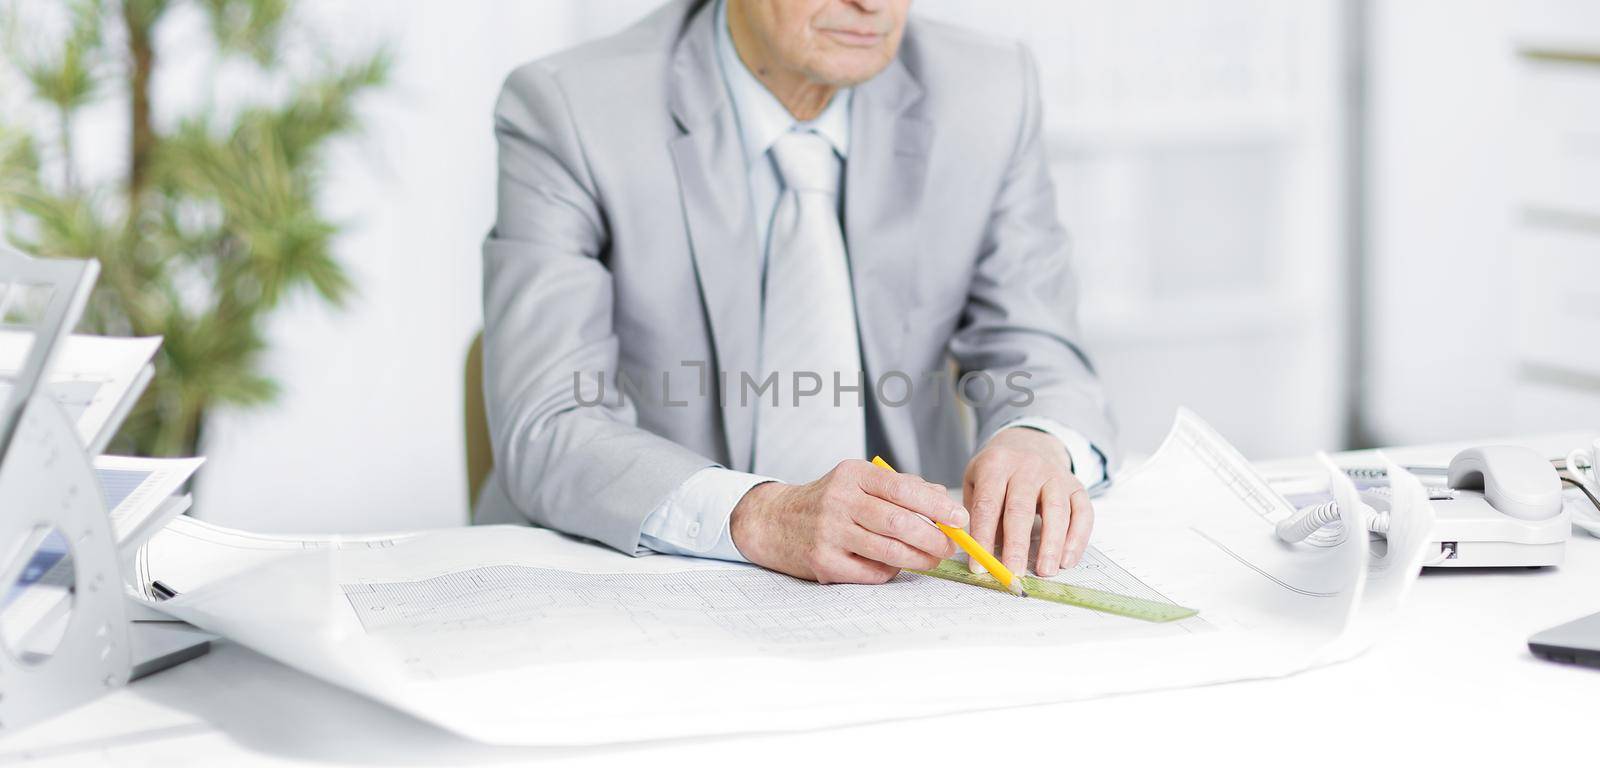 engineer works with drawings sitting at his Desk by SmartPhotoLab